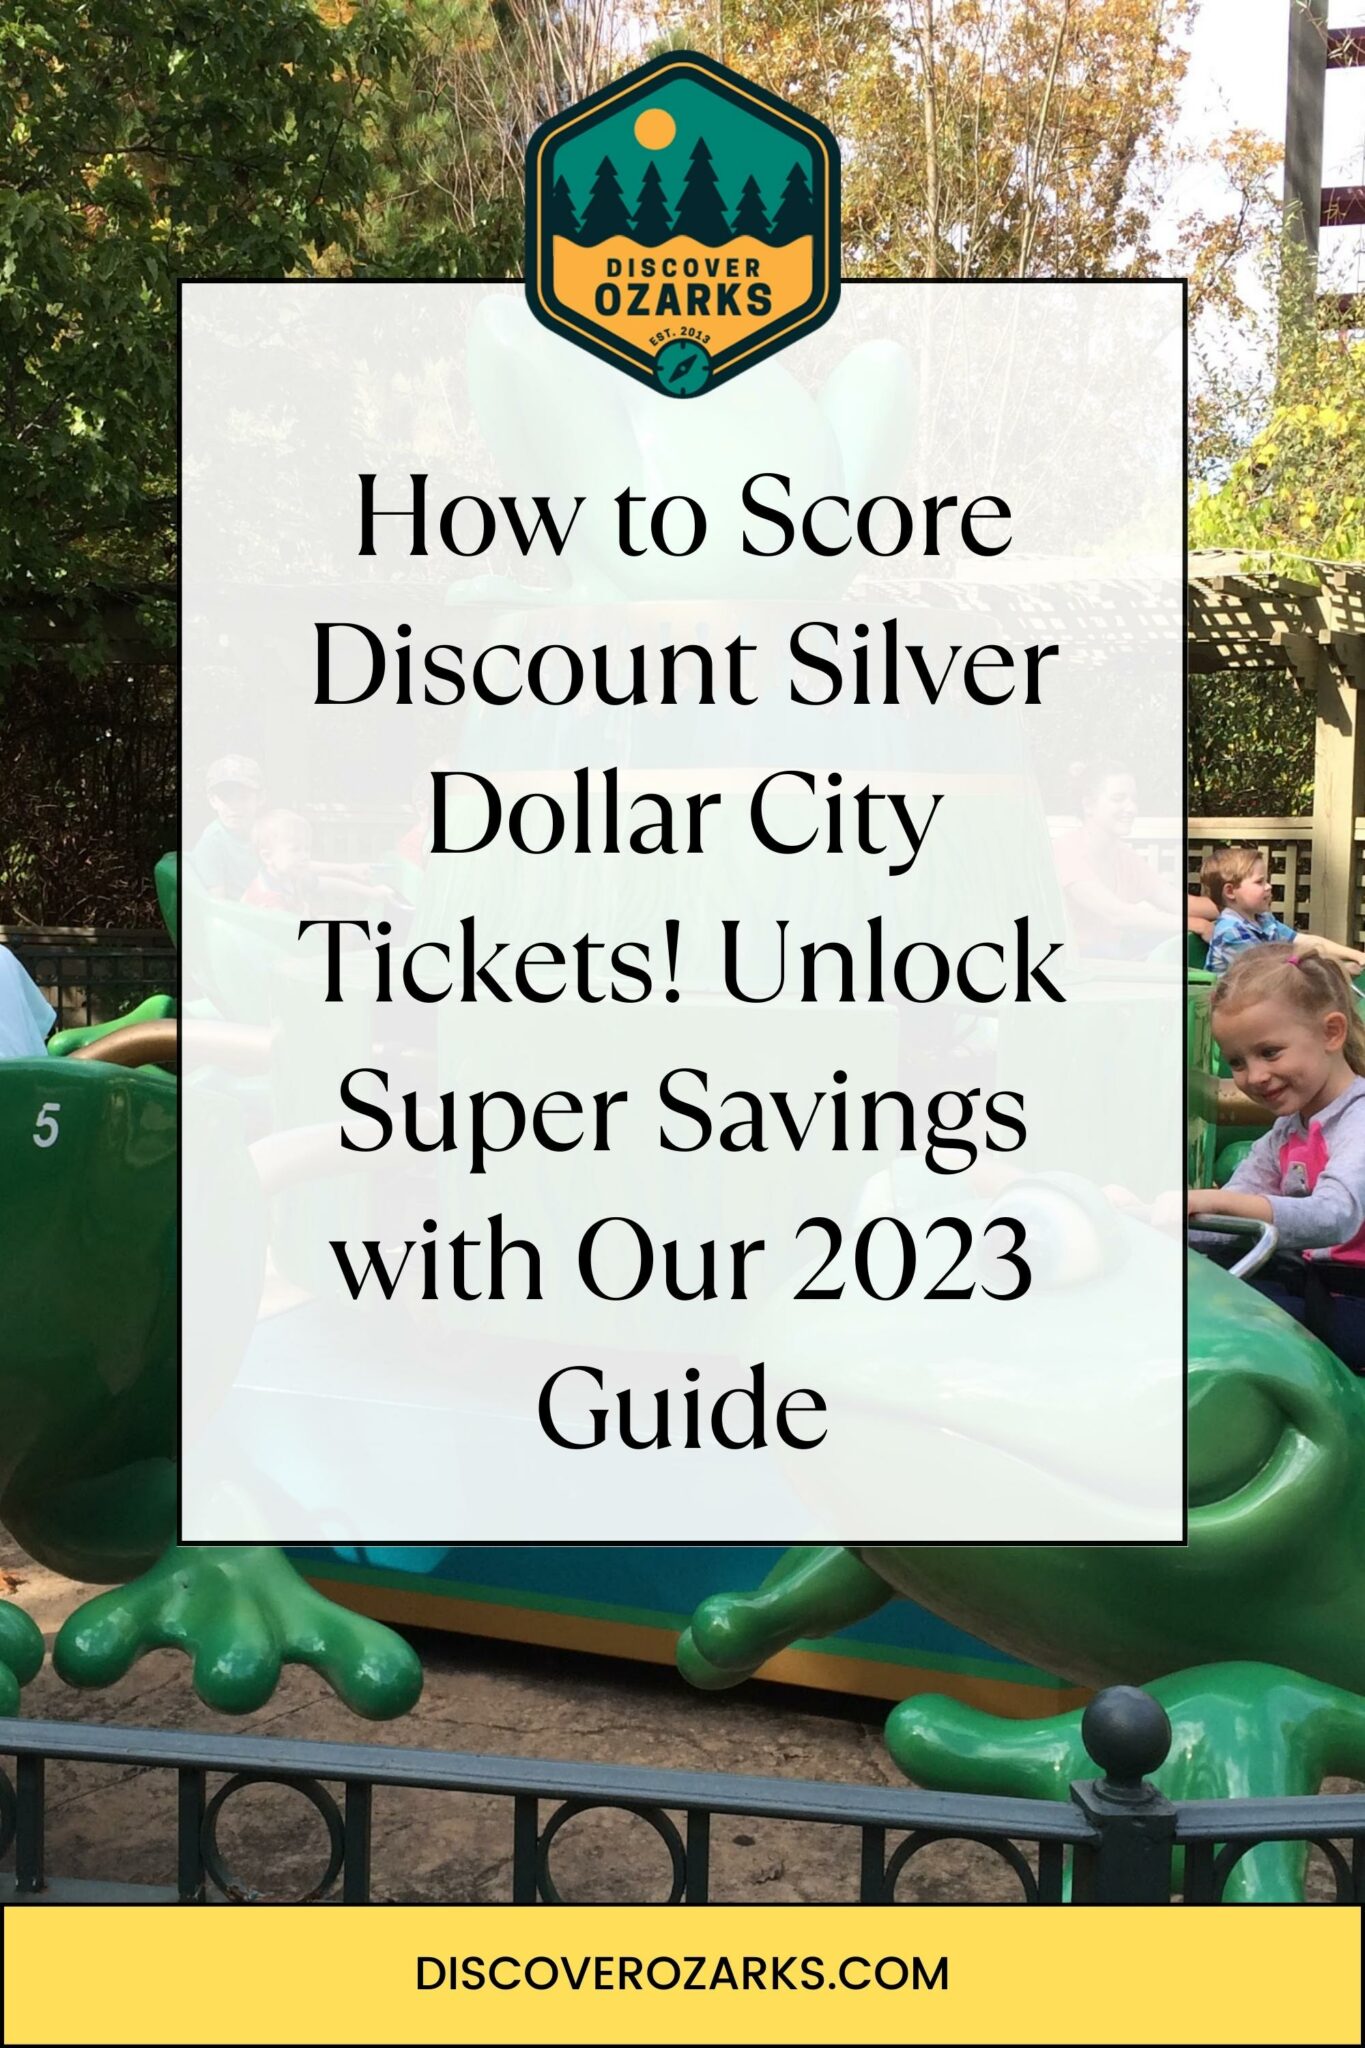 Score Discount Silver Dollar City Tickets Today (2023 Guide)